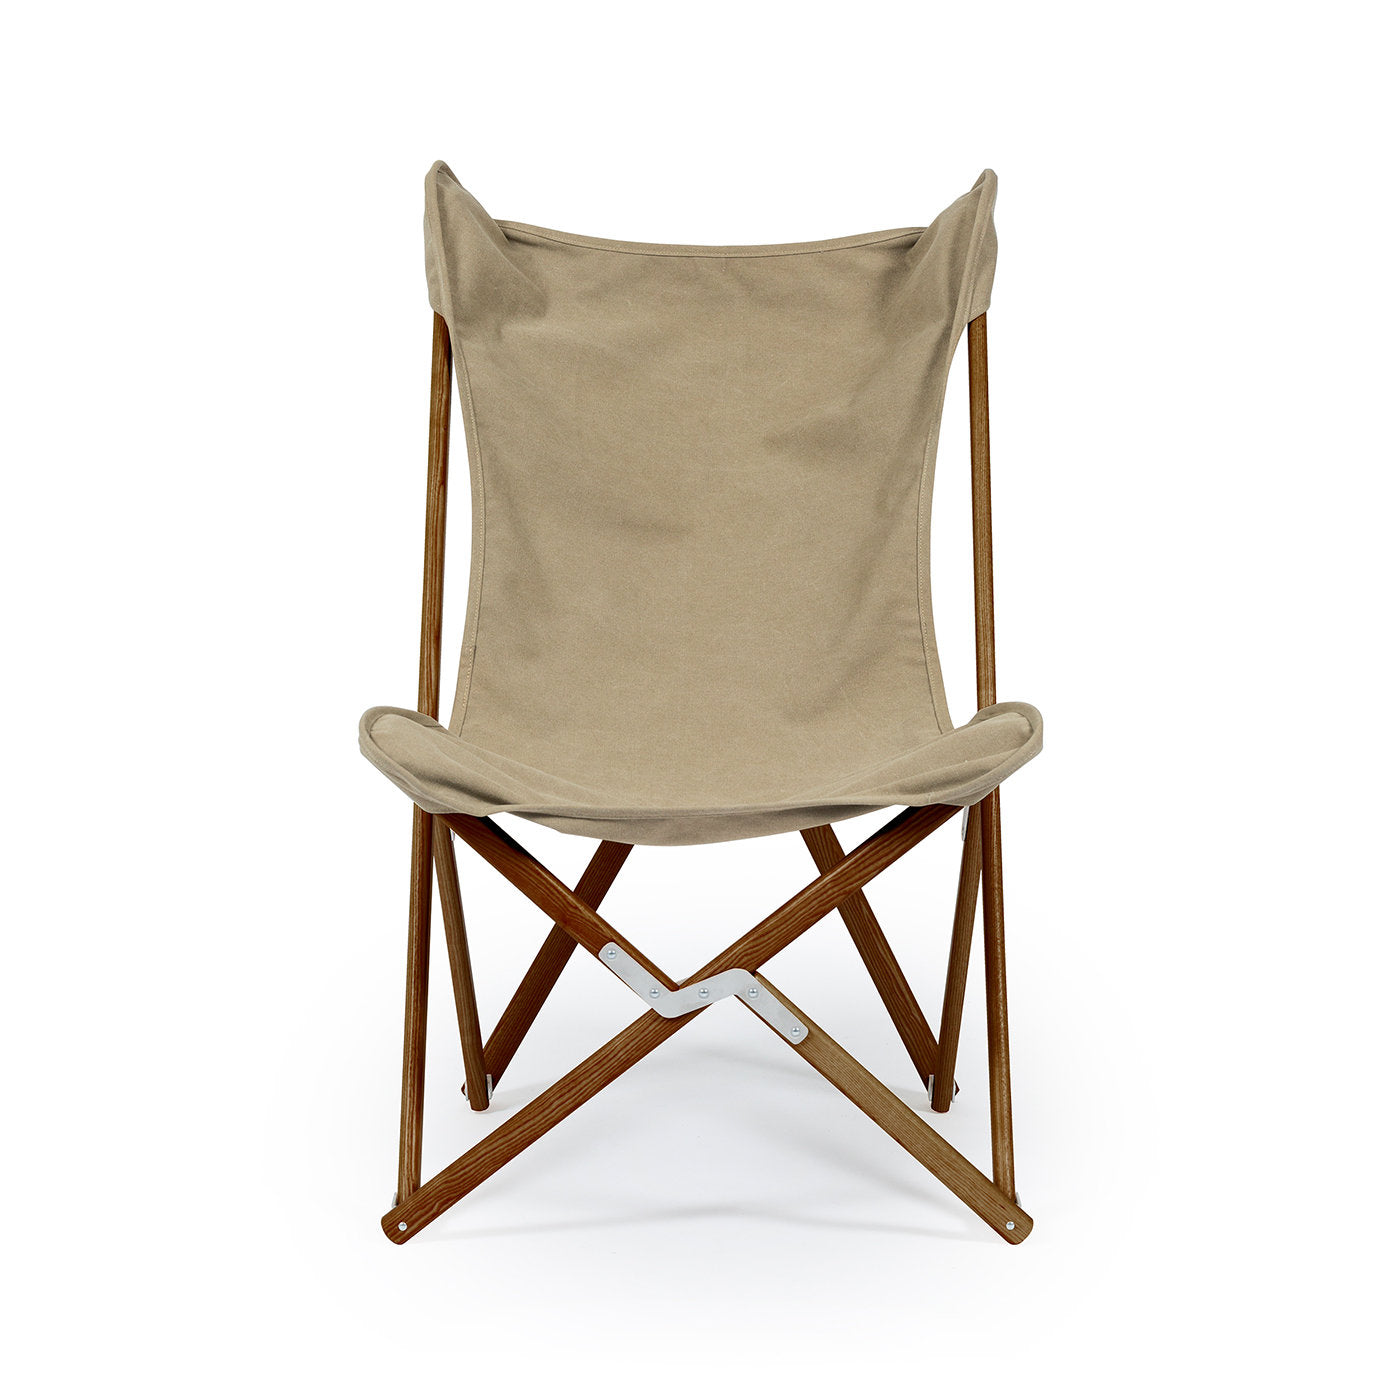 Tripolina Armchair in Camouflage Green - Alternative view 1